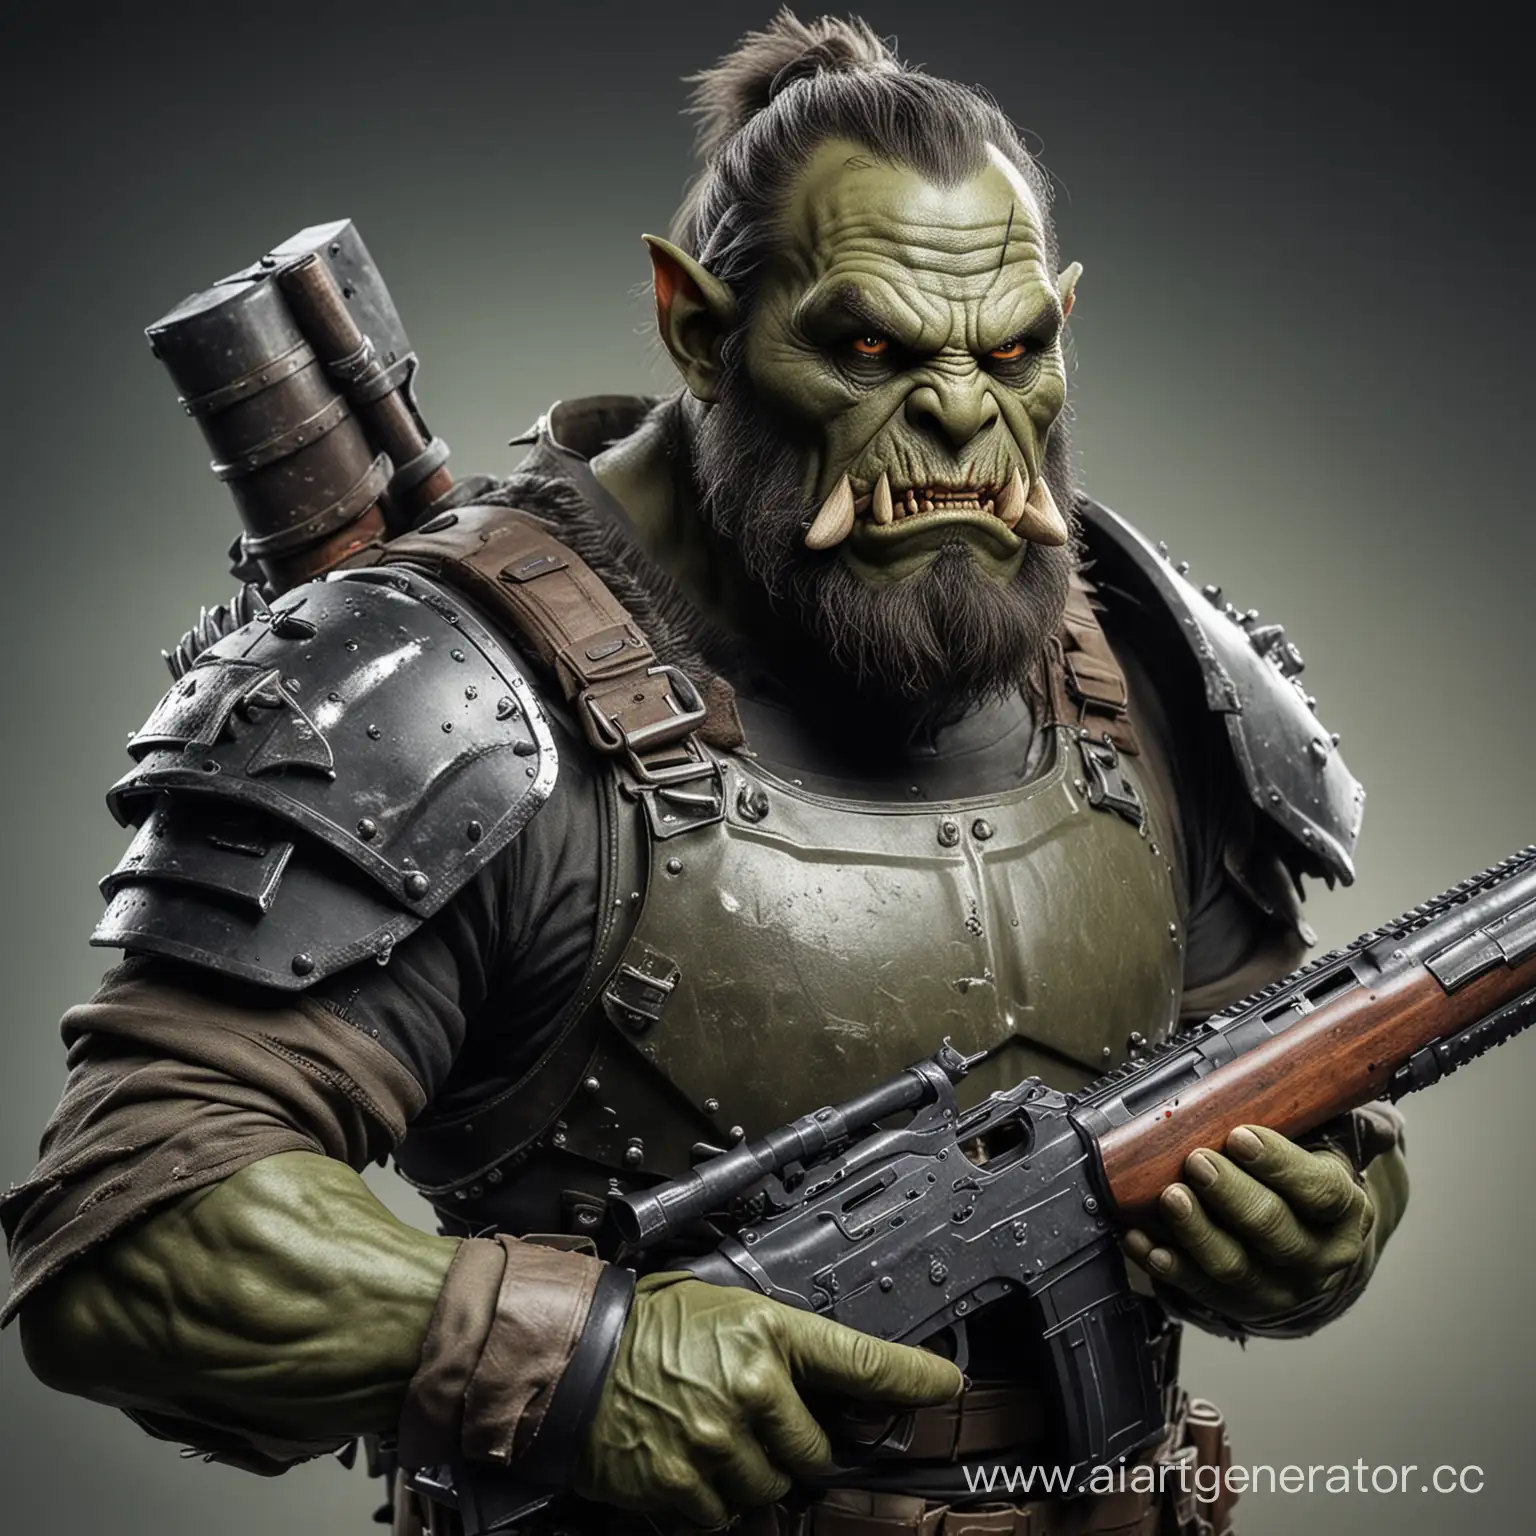 Bearded-Orc-Special-Forces-with-Shotgun-and-Axe-in-Body-Armor